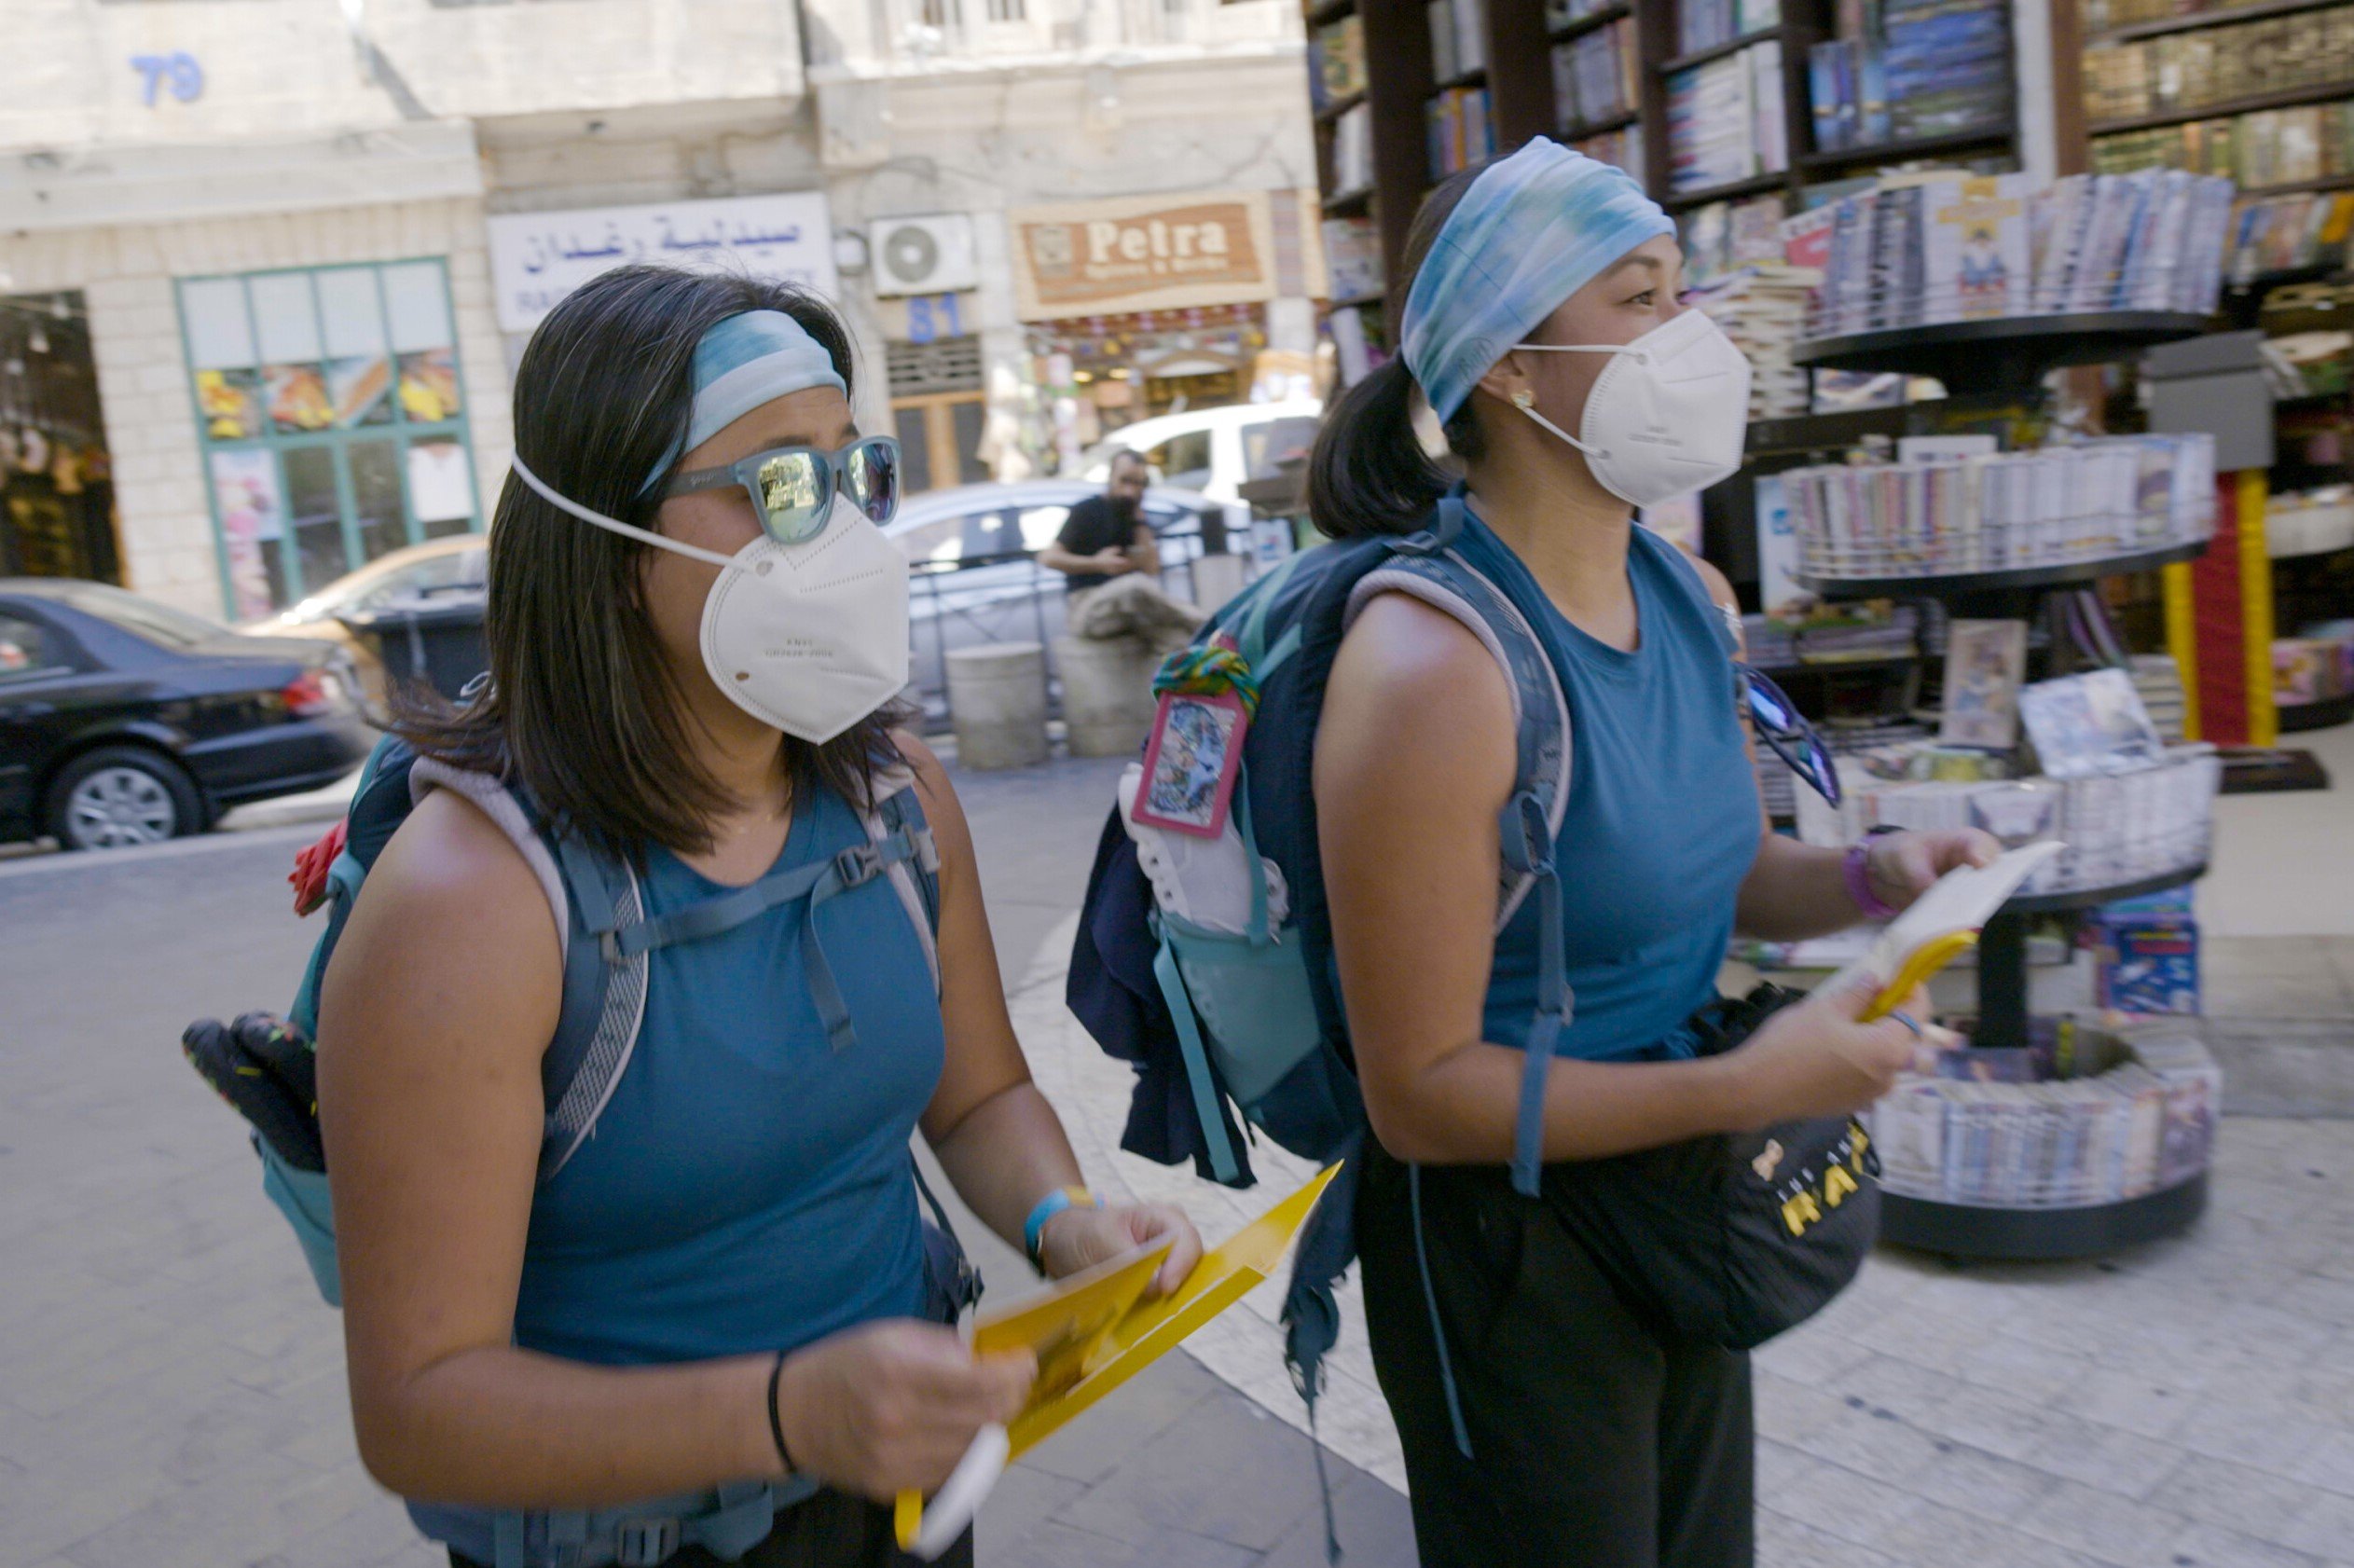 Emily Bushnell and Molly Sinert, who star in 'The Amazing Race 34' Episode 6, 'Step by Step,' wear matching teal tank tops, blue and white headbands, black pants, and white face masks.